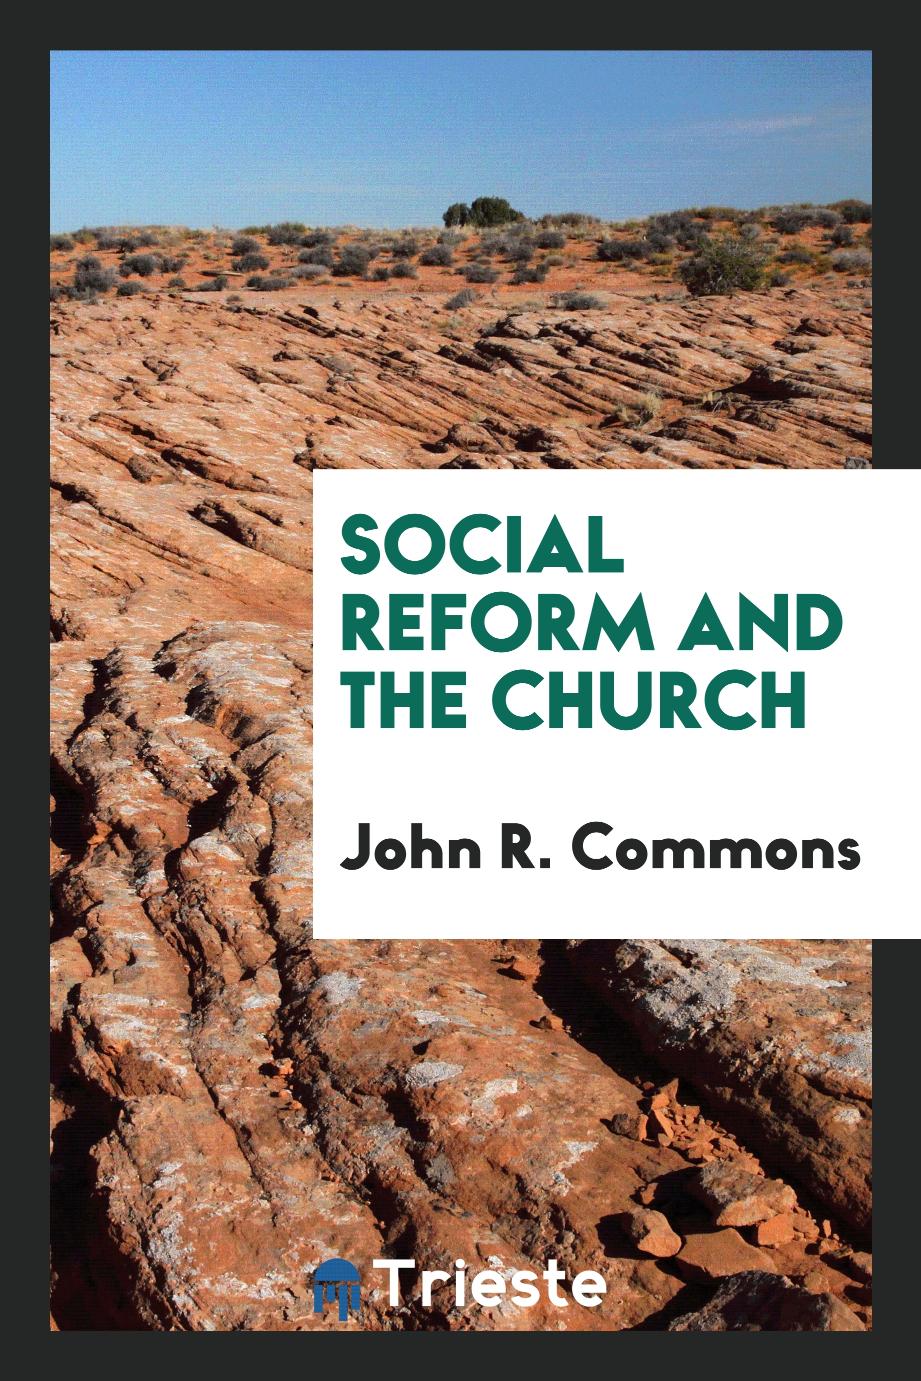 Social reform and the Church